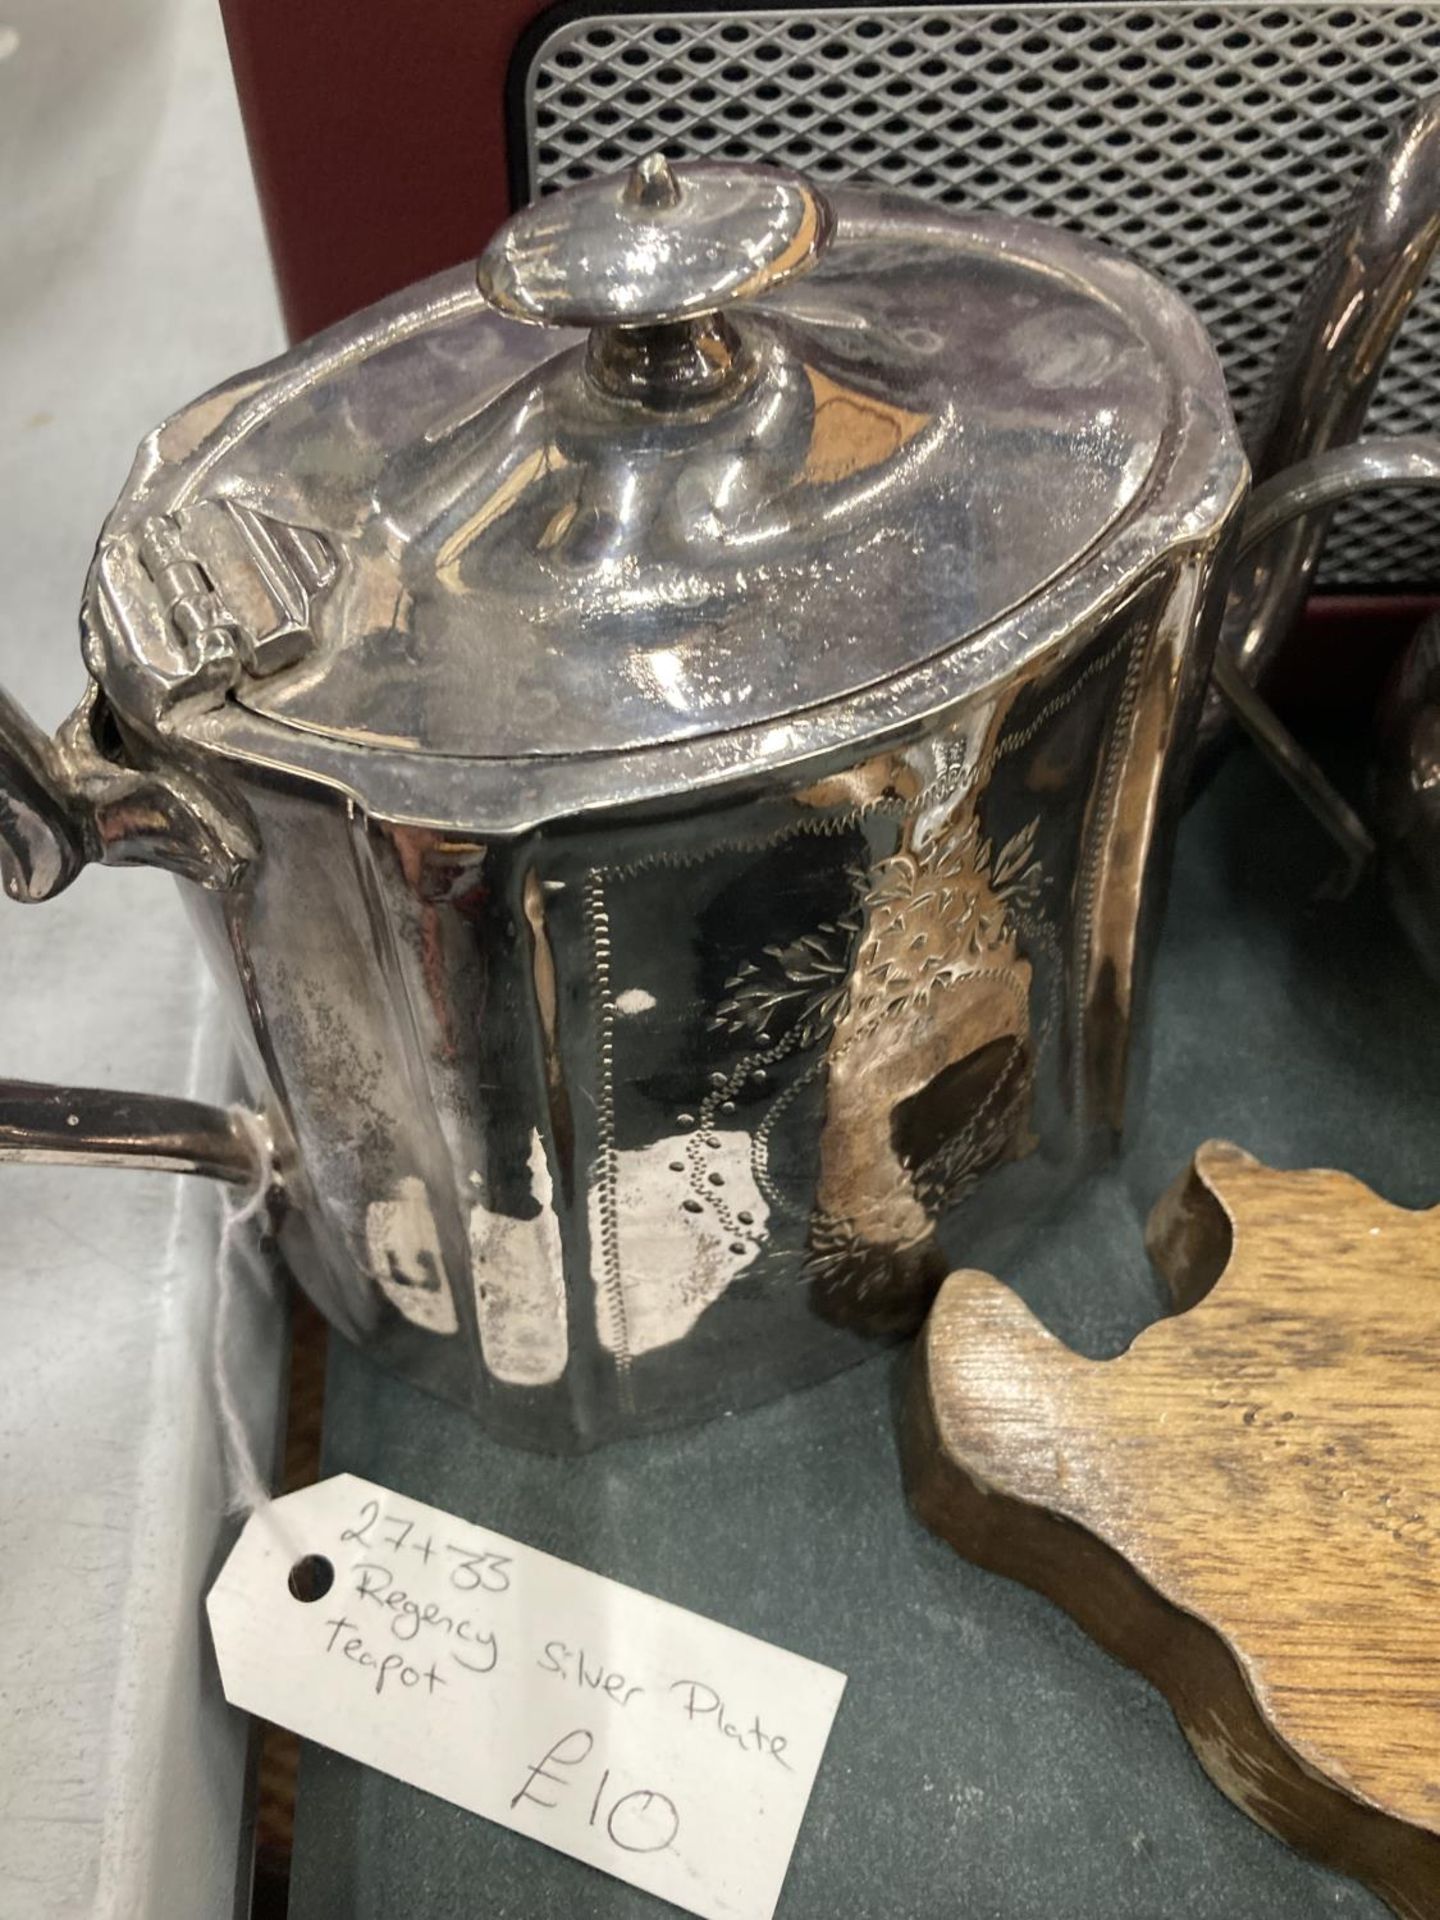 A MIXED LOT TO INCLUDE A VINTAGE RADIO, SILVER PLATE TEAPOT AND SUGAR BOWL, KODAK "BROWNIE" VECTA - Image 3 of 6